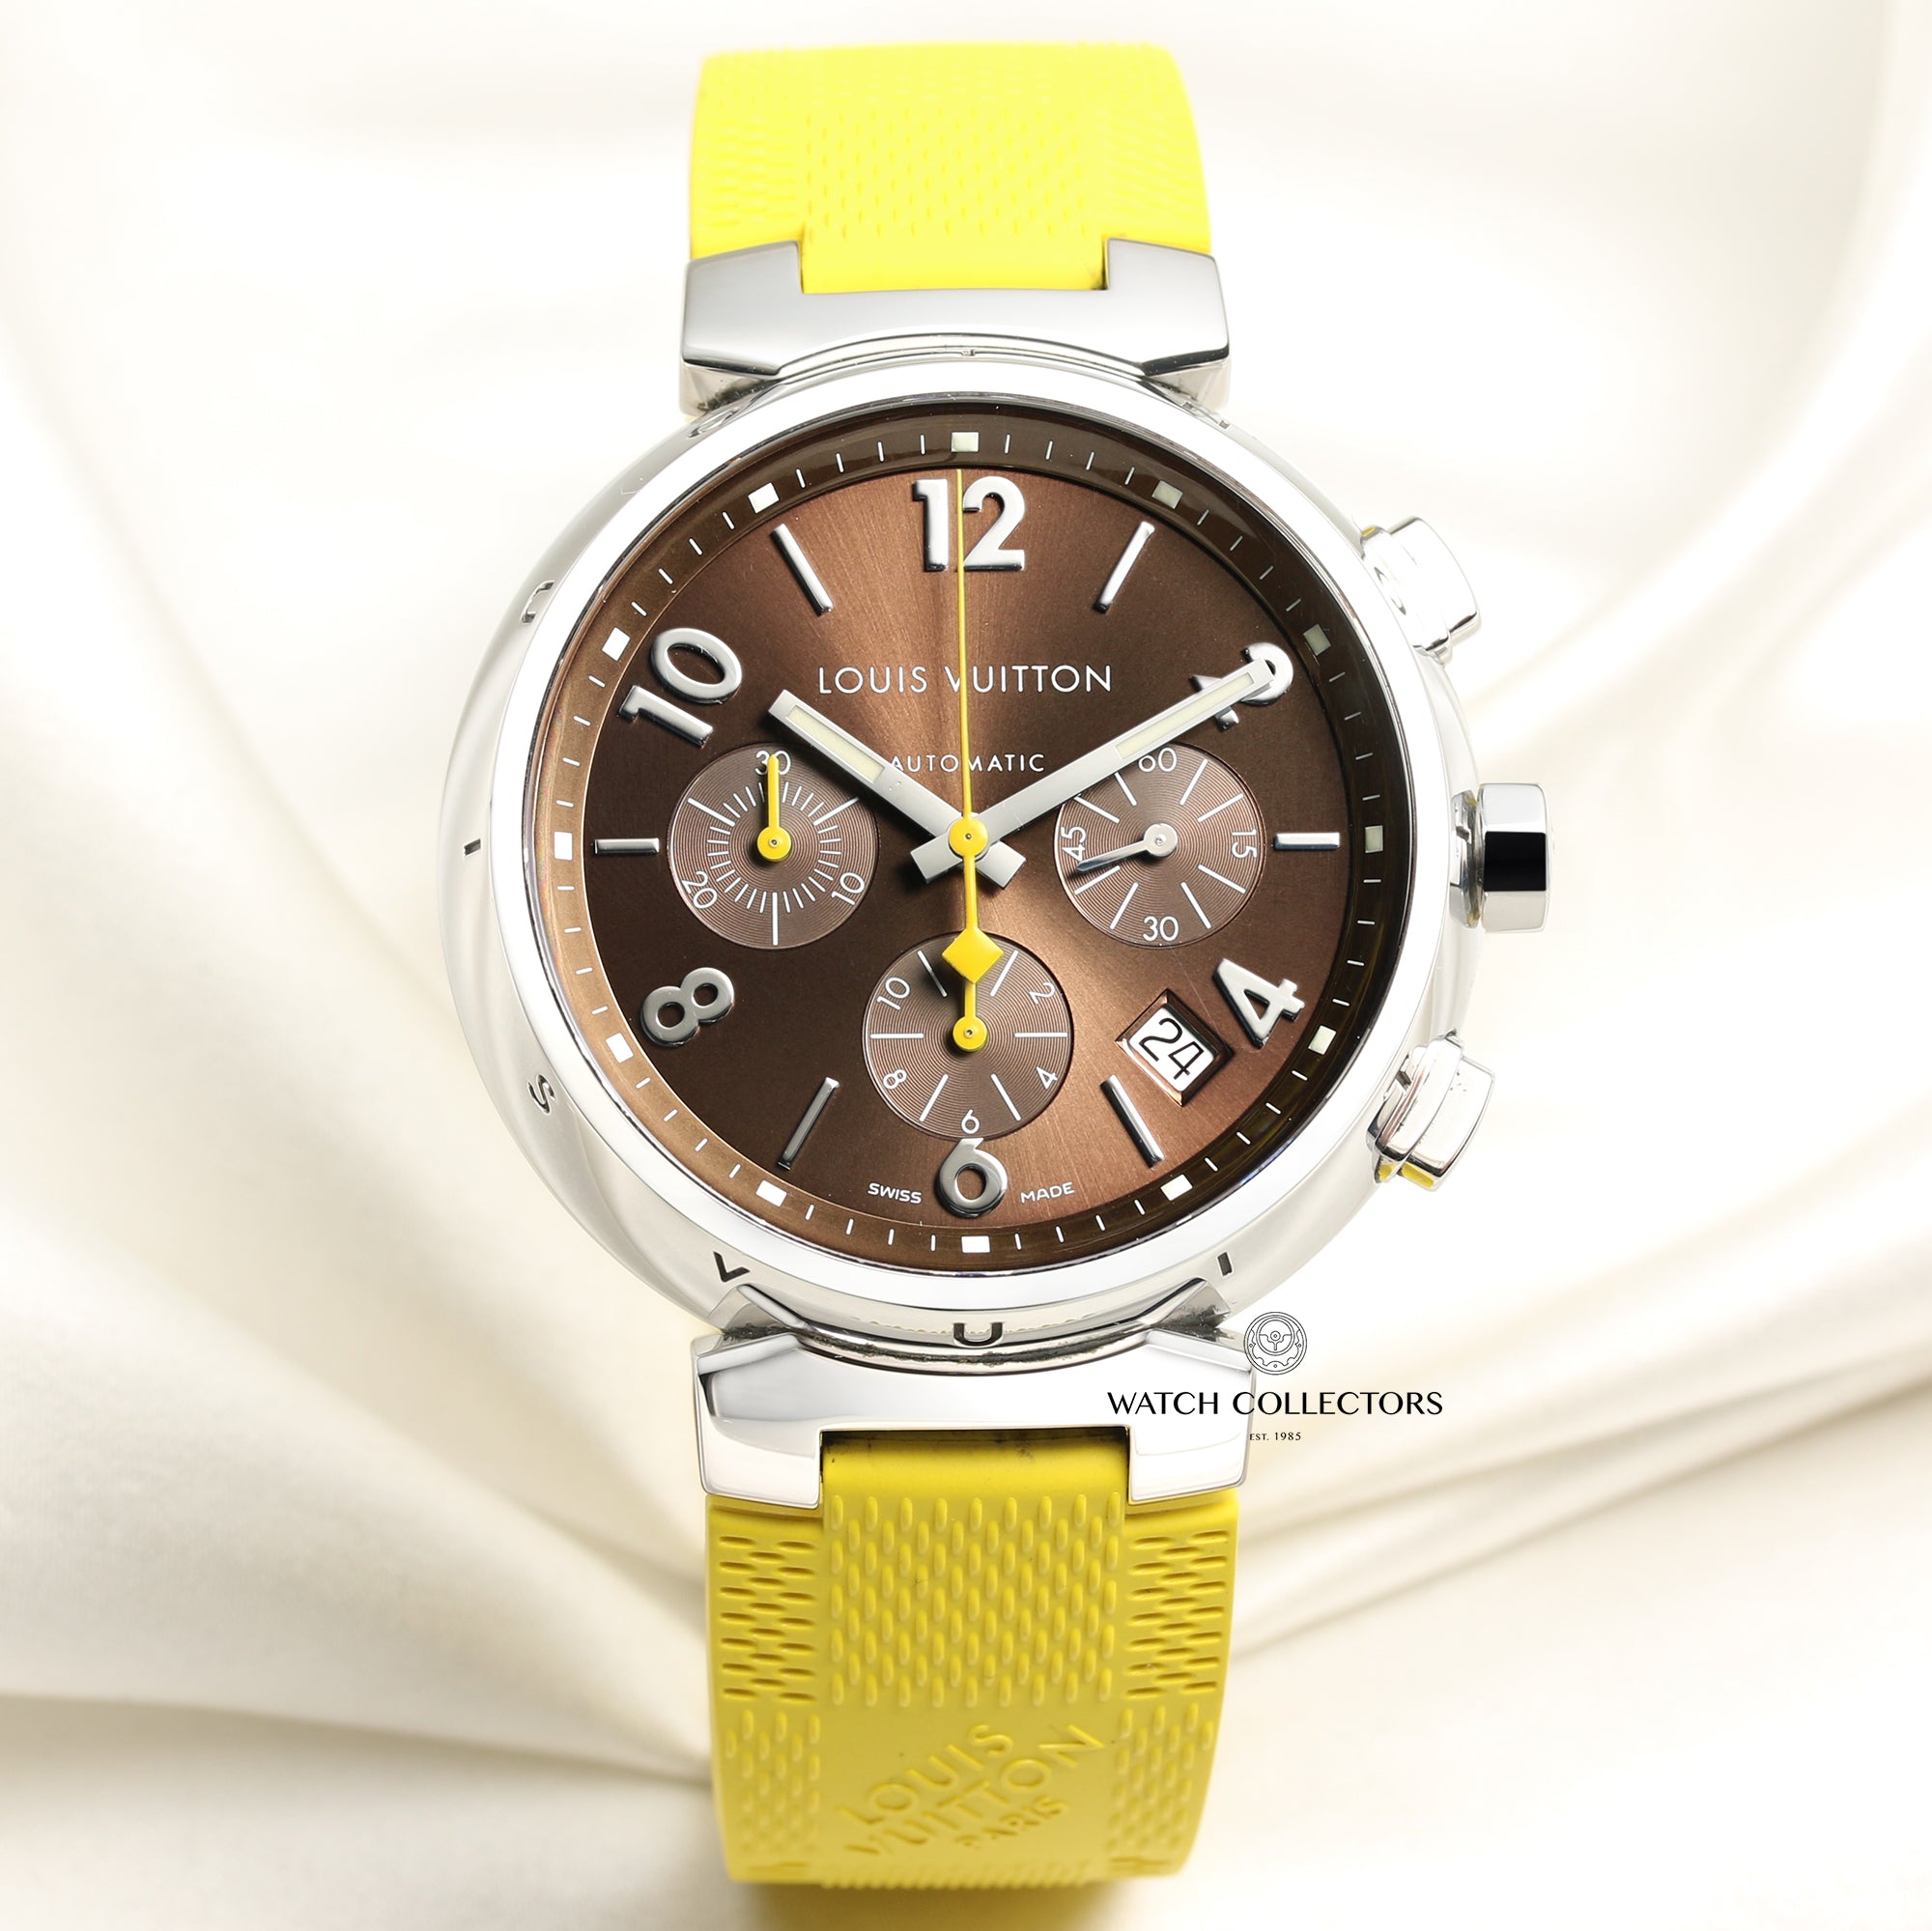 New and Used Louis Vuitton Watches For Sale - WatchPatrol